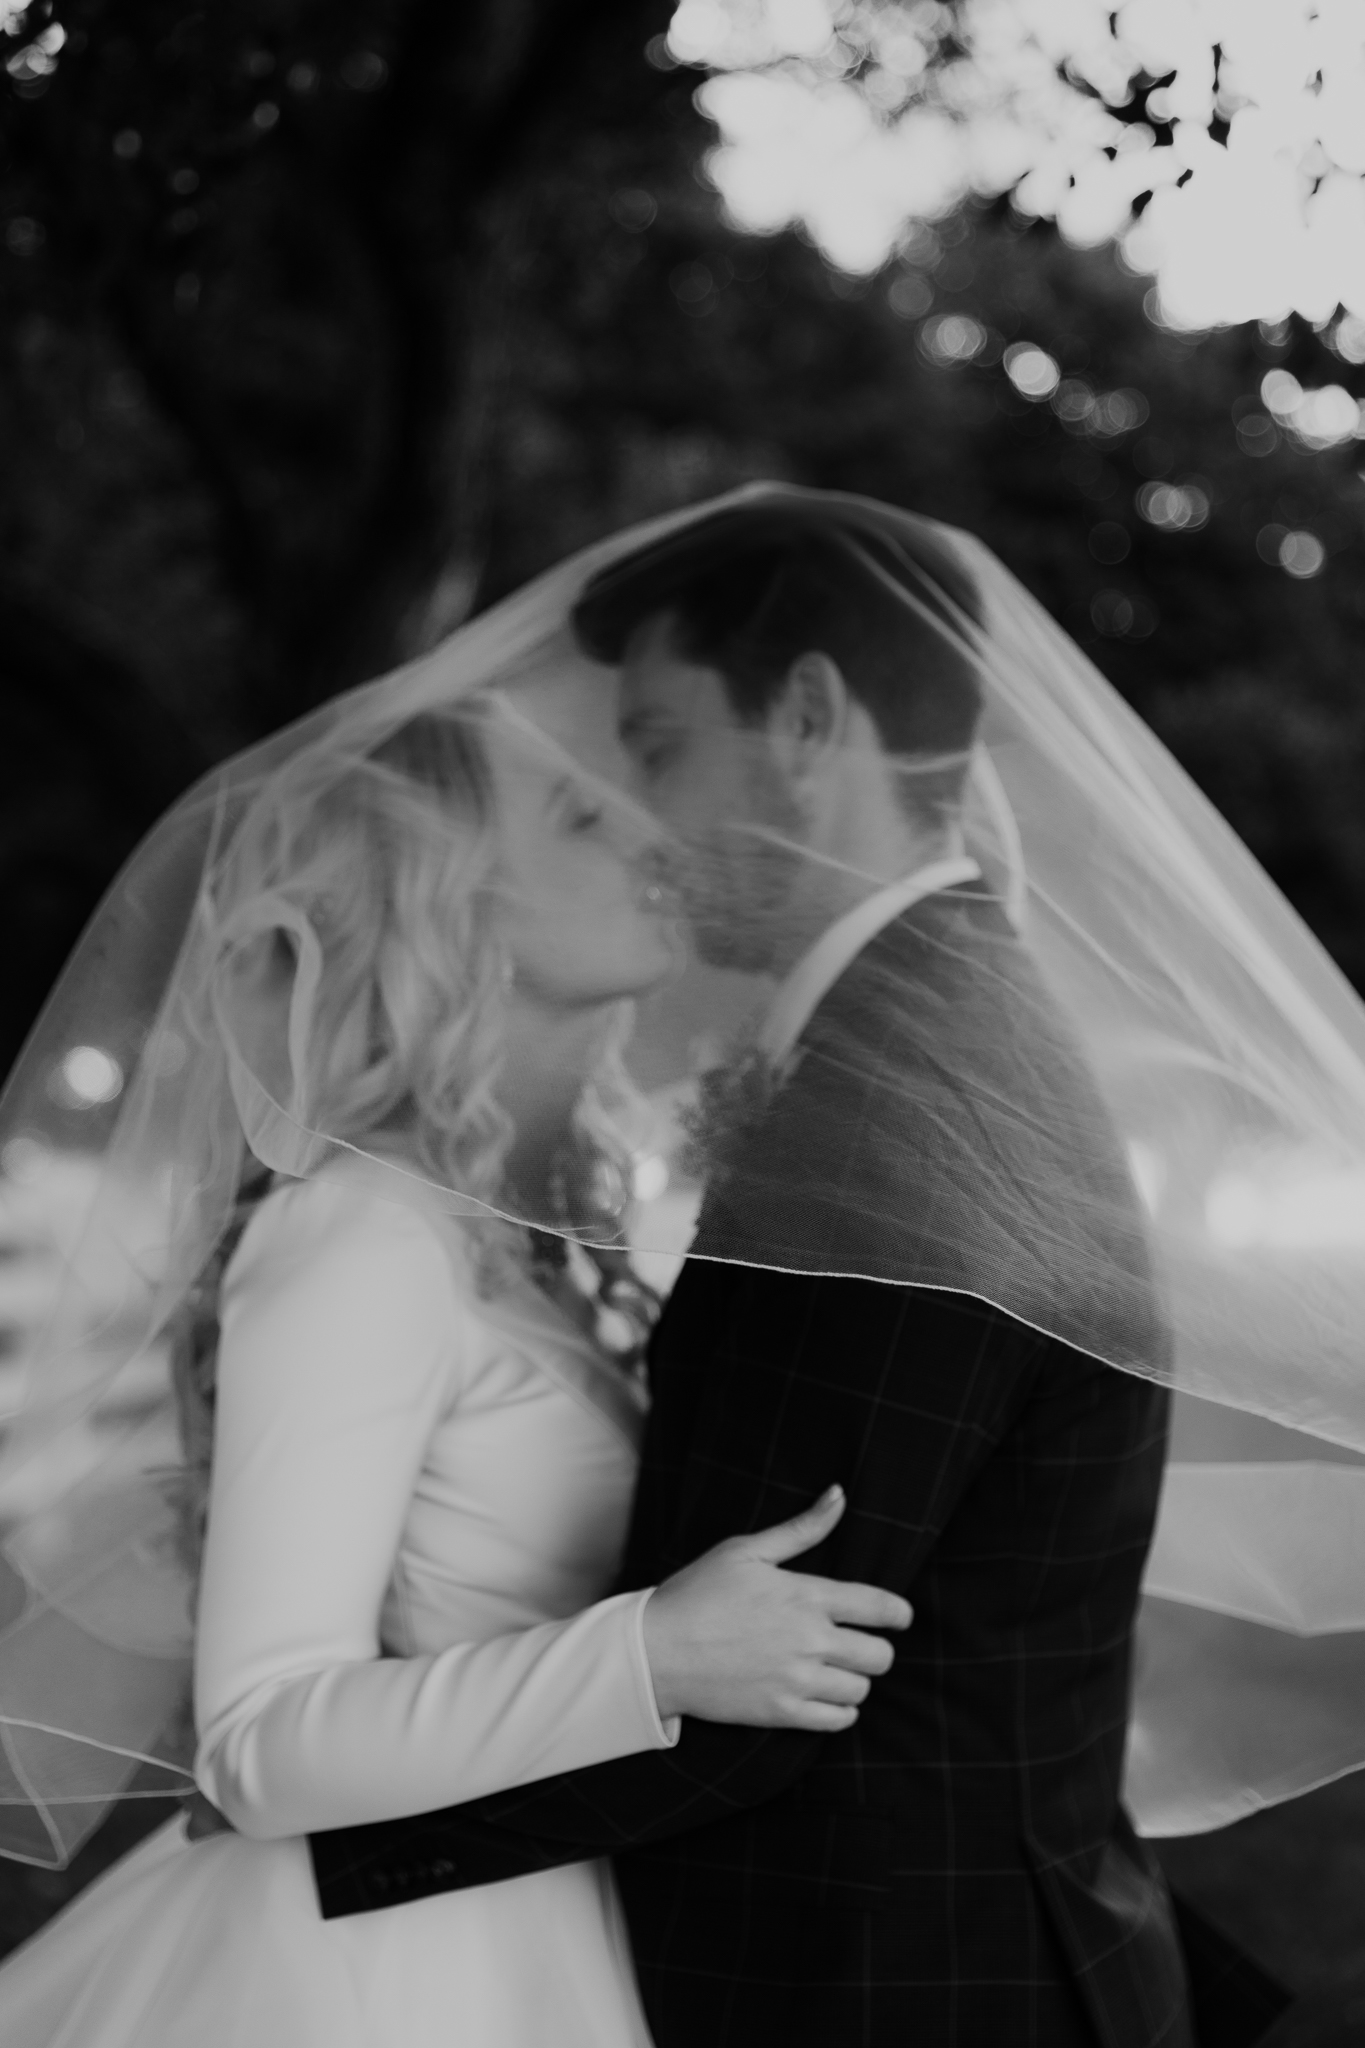 Bride and groom smile at each other and kiss underneath a sheer wedding veil